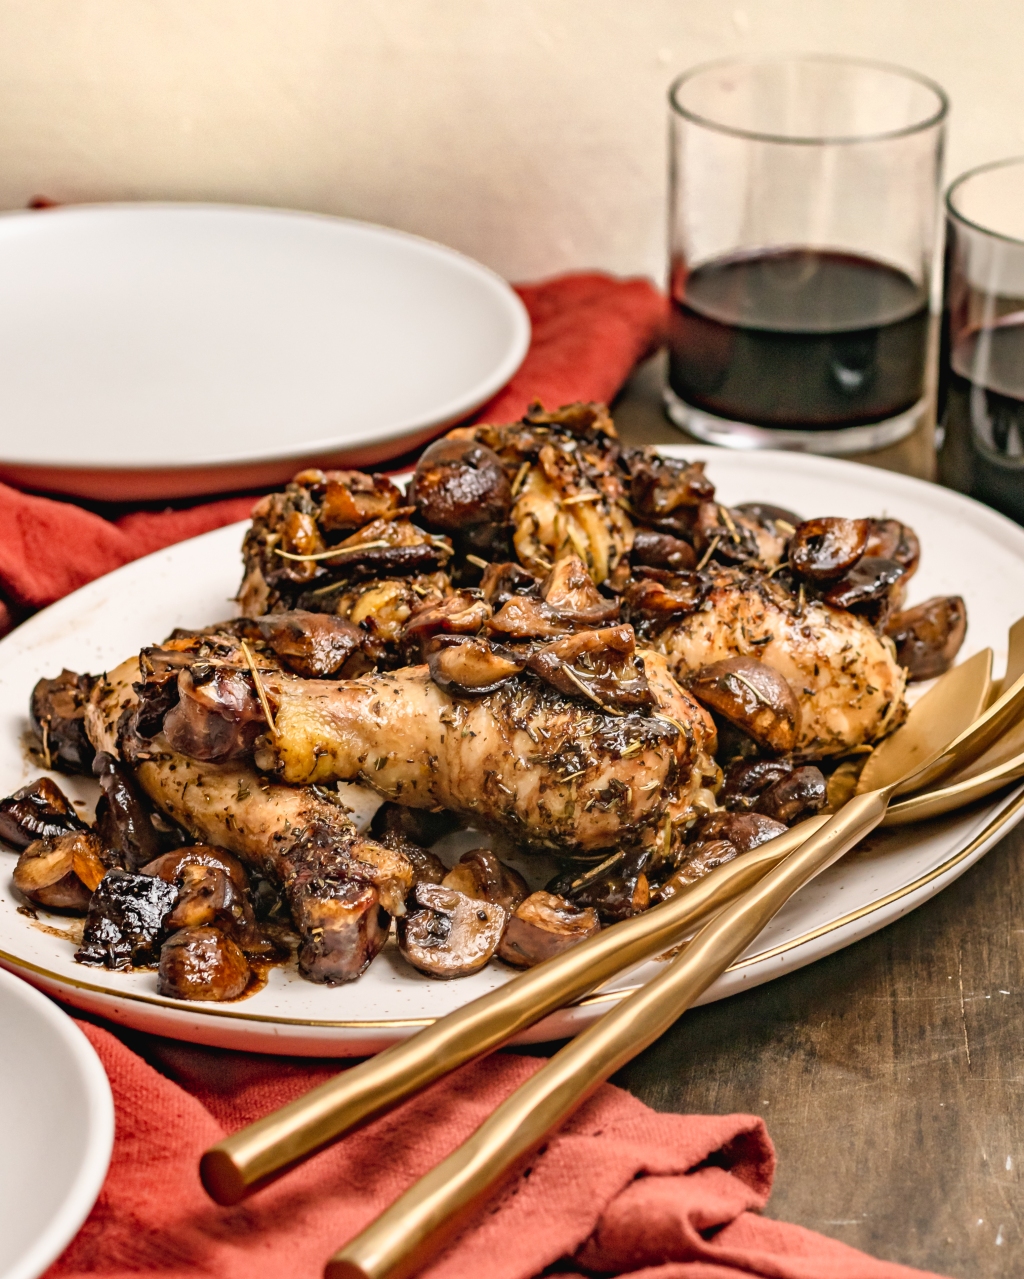 ROASTED CHICKEN LEGS WITH BALSAMIC MUSHROOMS